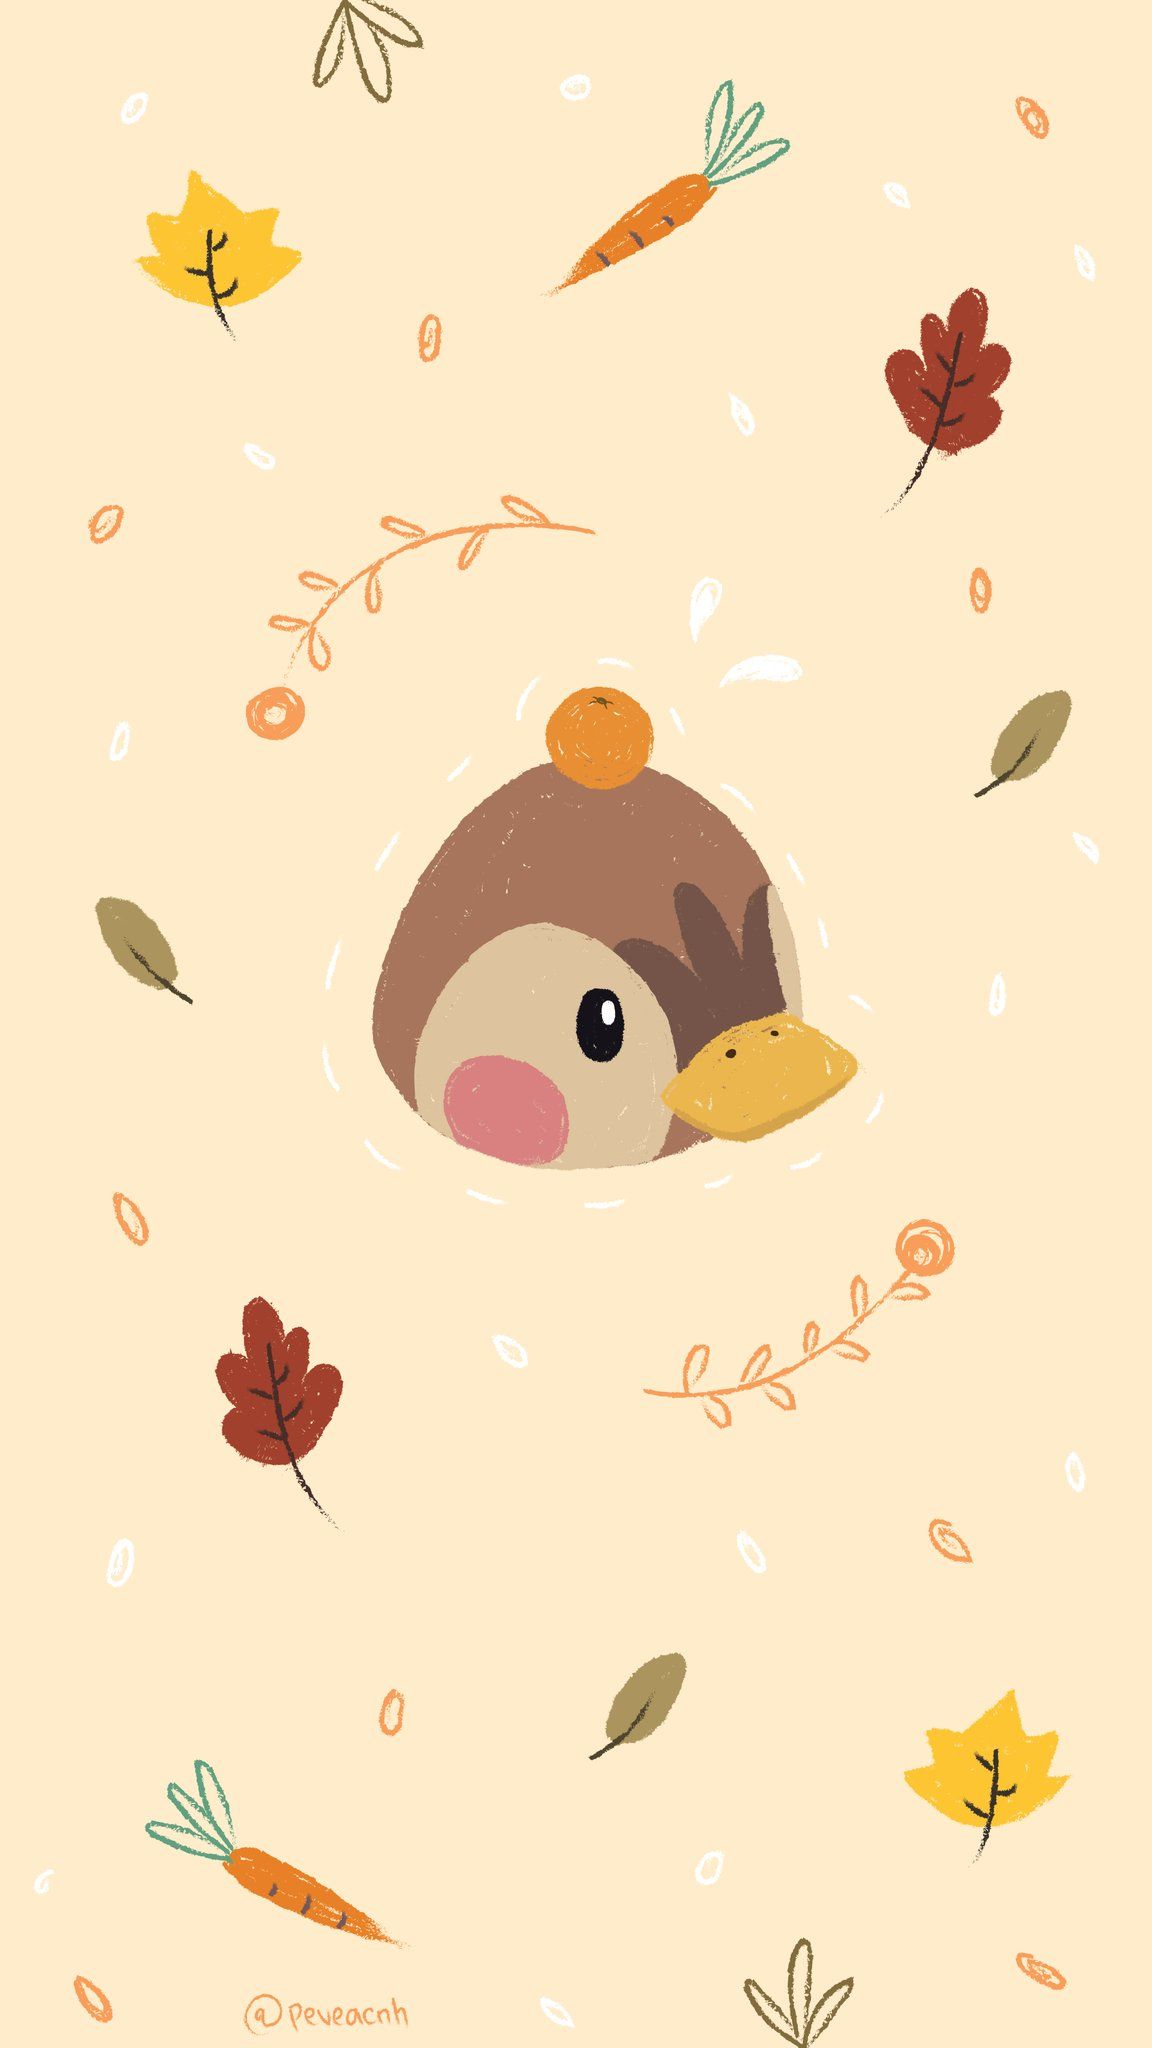 A cute little bird is sitting in the middle of some leaves - Animal Crossing